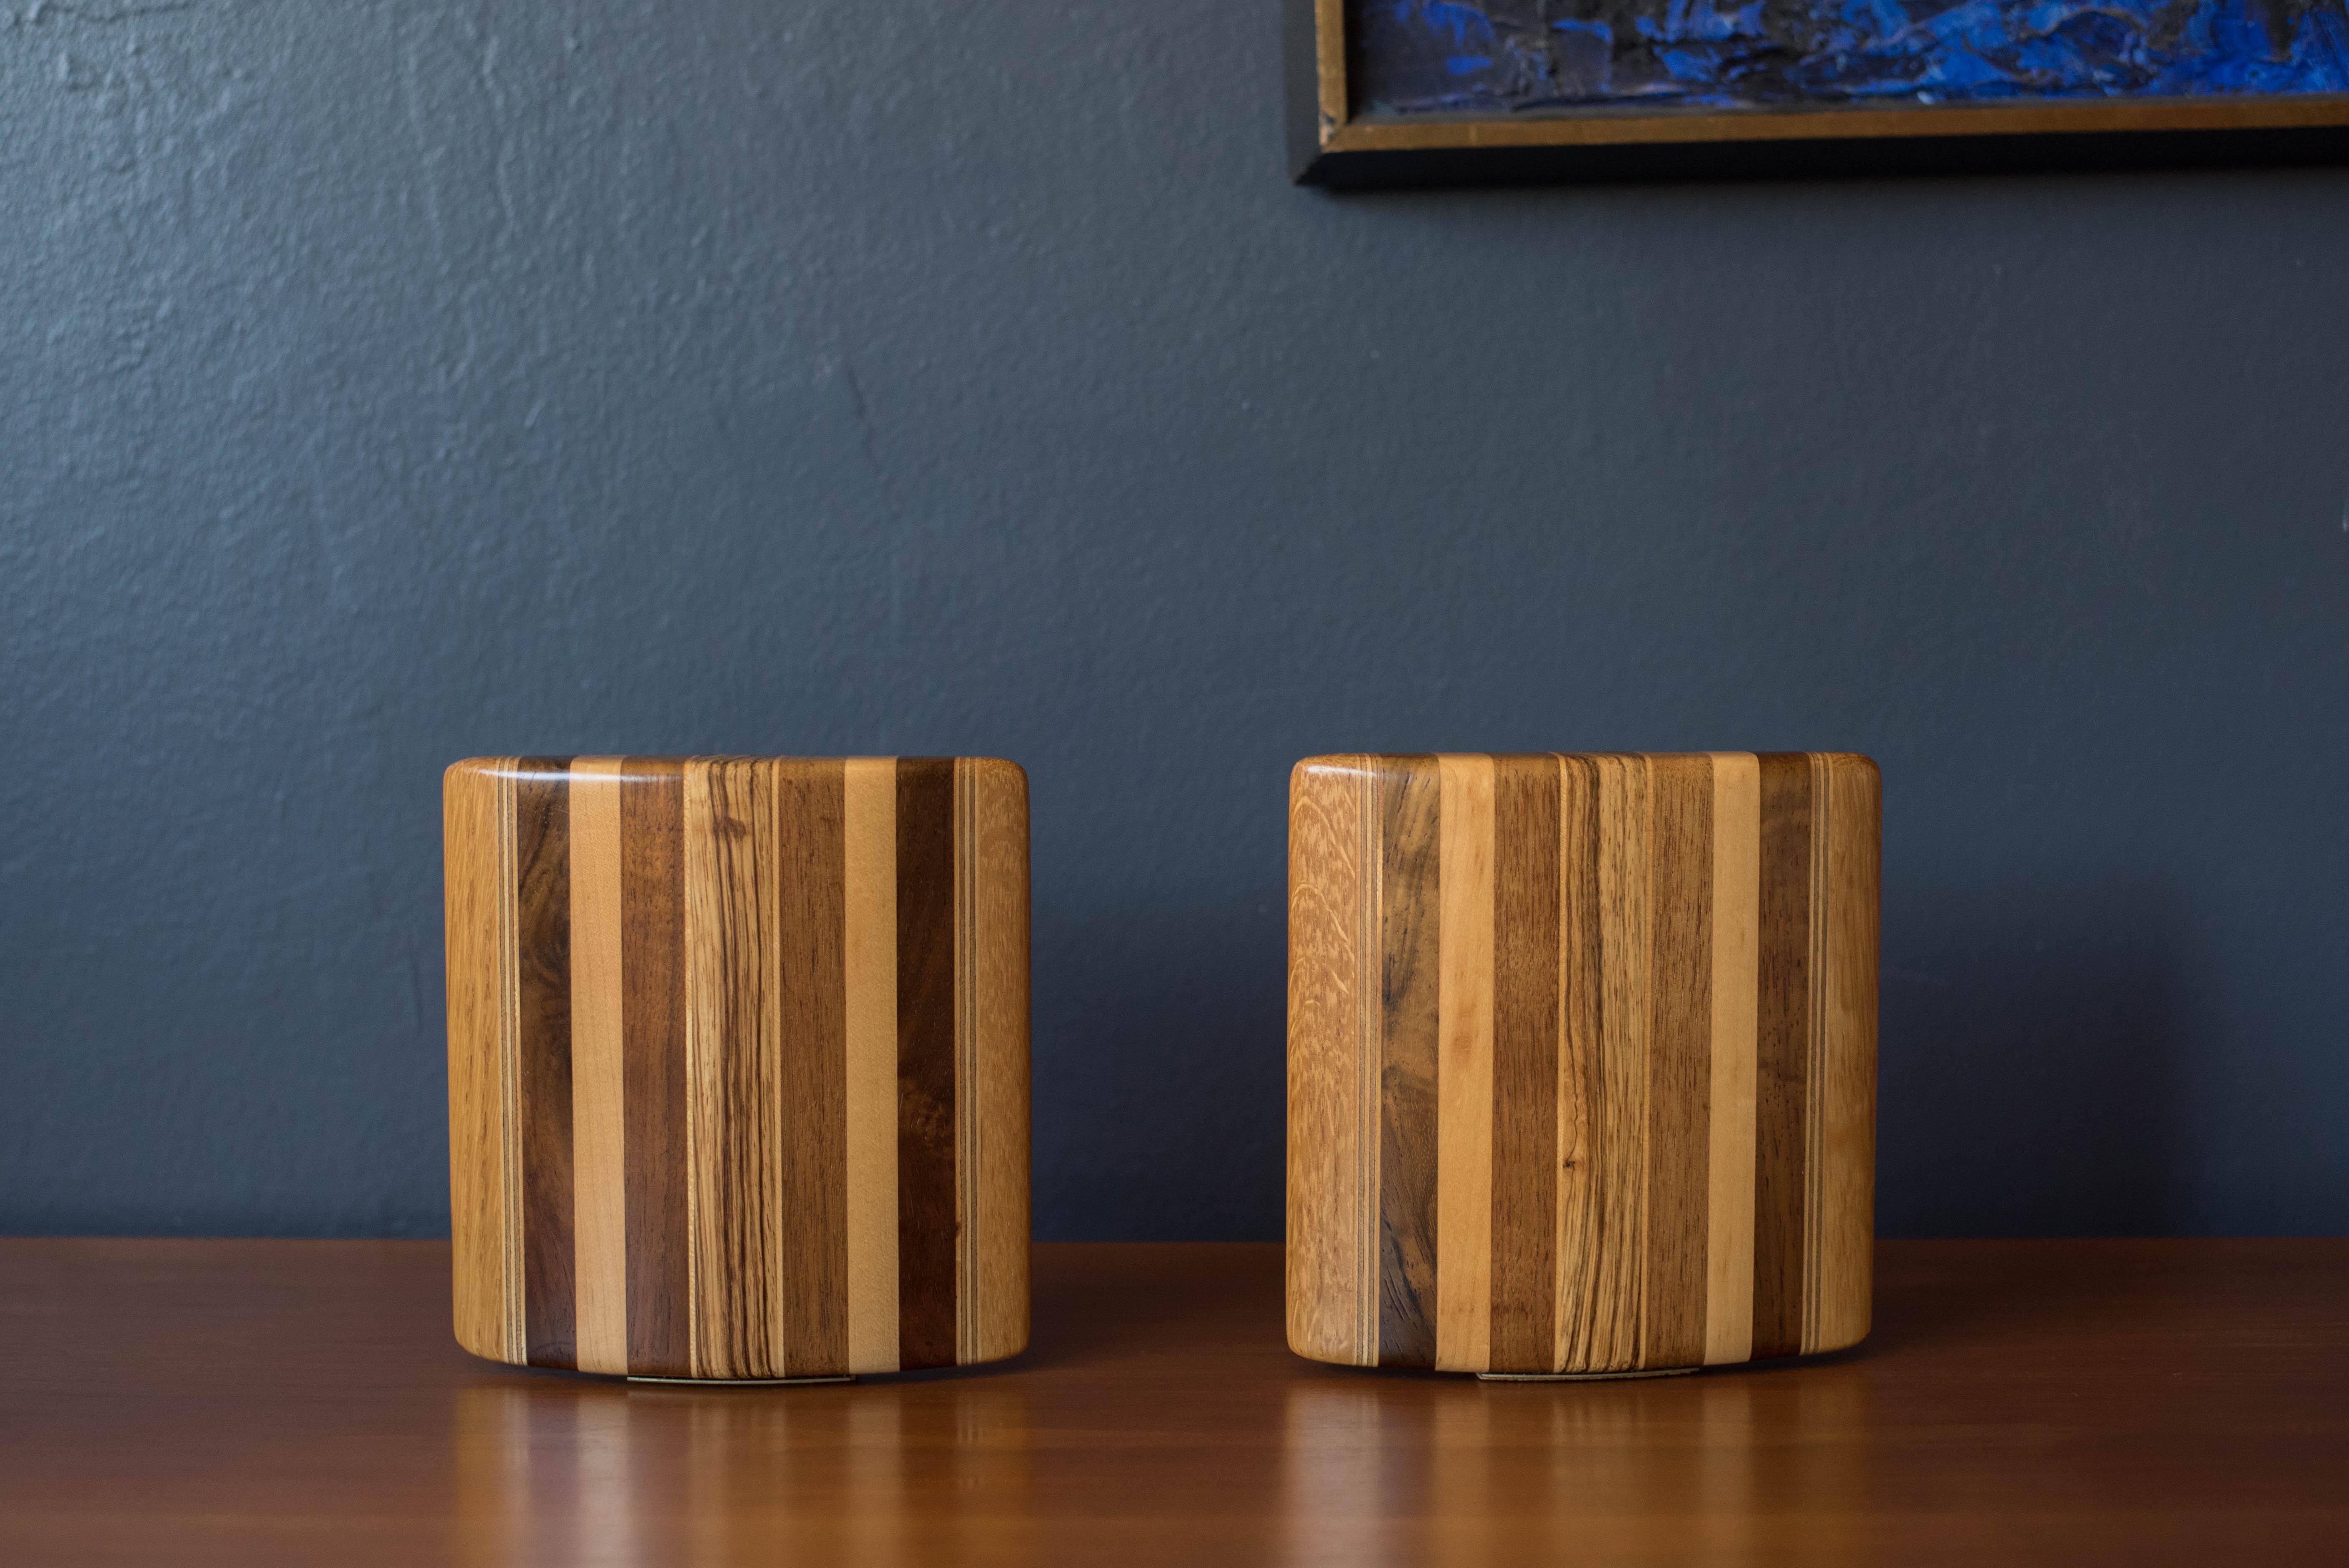 Vintage handmade studio solid planked mixed wood bookends, circa 1970s. This unique set is handcrafted in zebrawood, walnut, maple, oak, rosewood and plywood. Perfect to display with any Danish modern or contemporary decor. Price is for the pair.

 